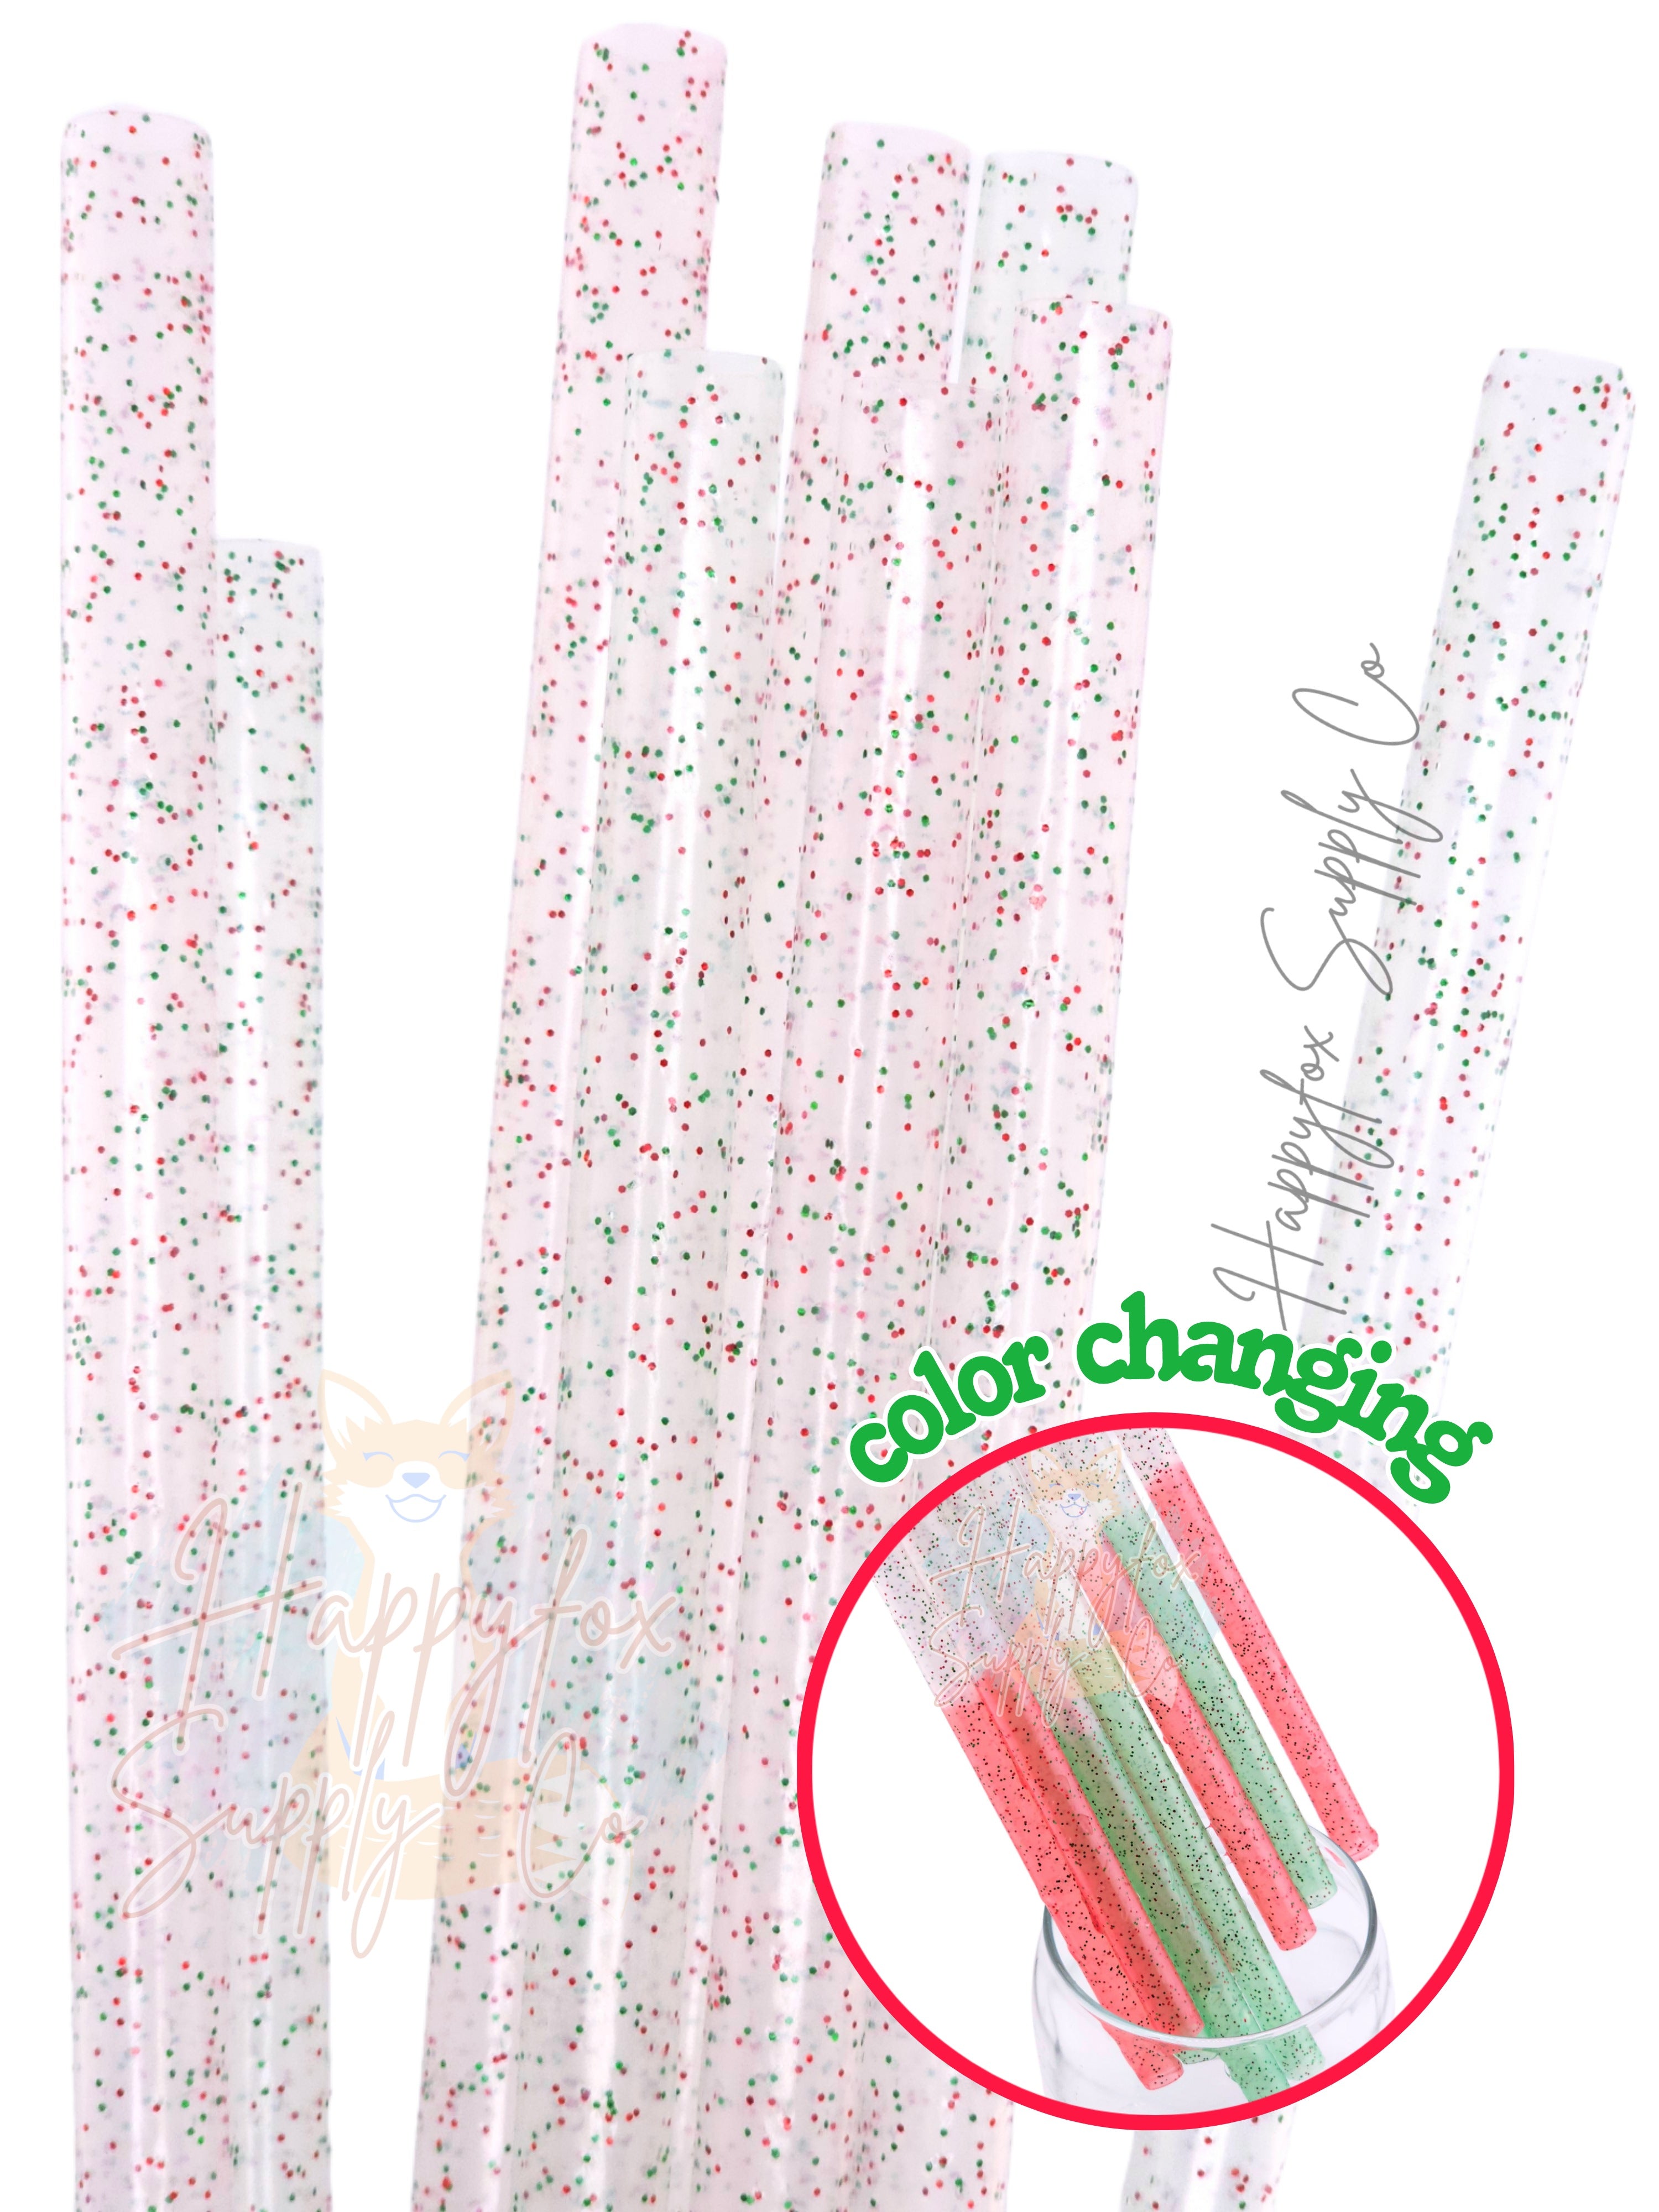 9 Pink Hearts Color Changing Straws No Stopper – Happyfox Supply Co